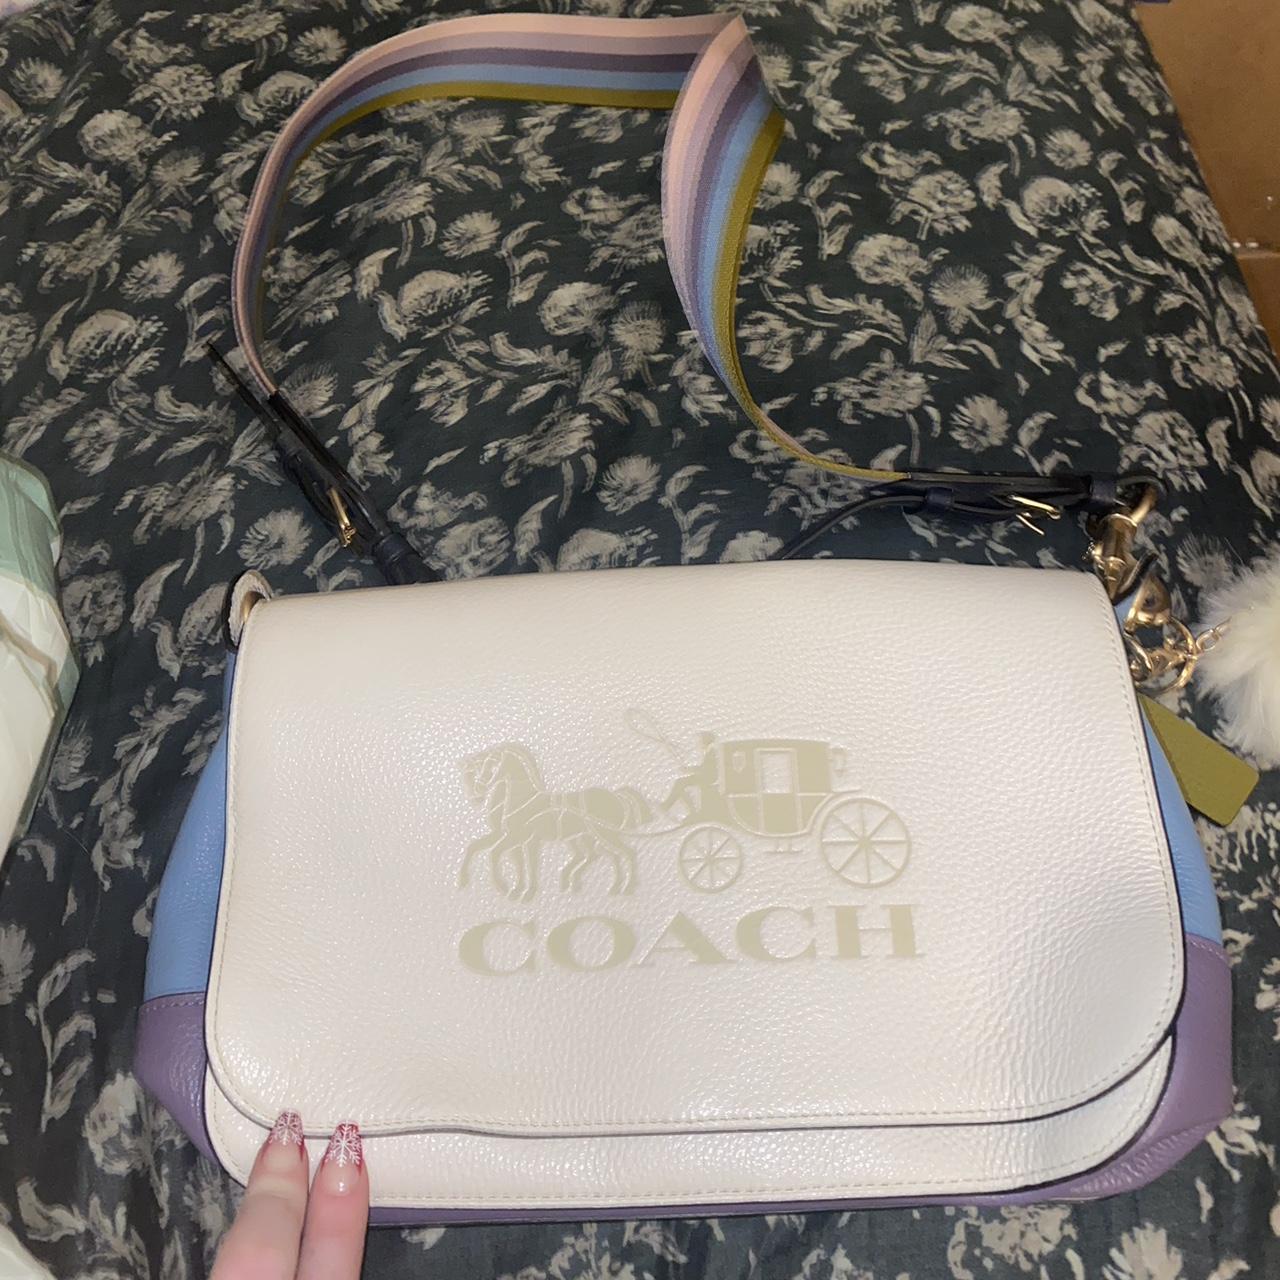 Handbags- Coach Leather wallet/keychain - Cream w/pink and yellow